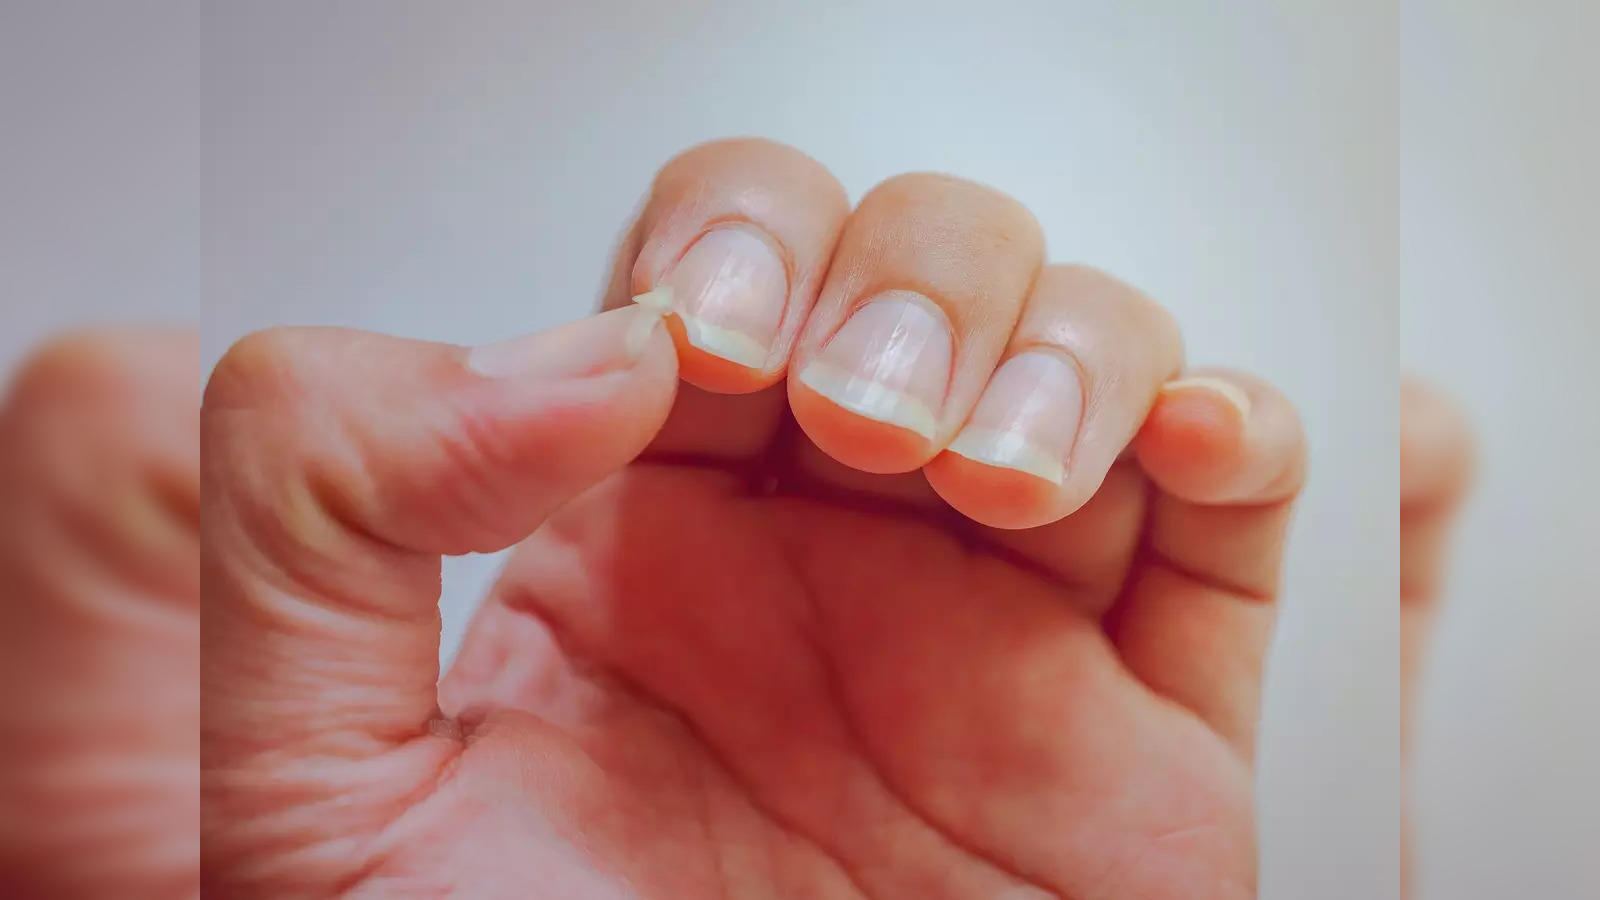 How to Survive Splitting Nails. Causes & Remedies. - YouTube